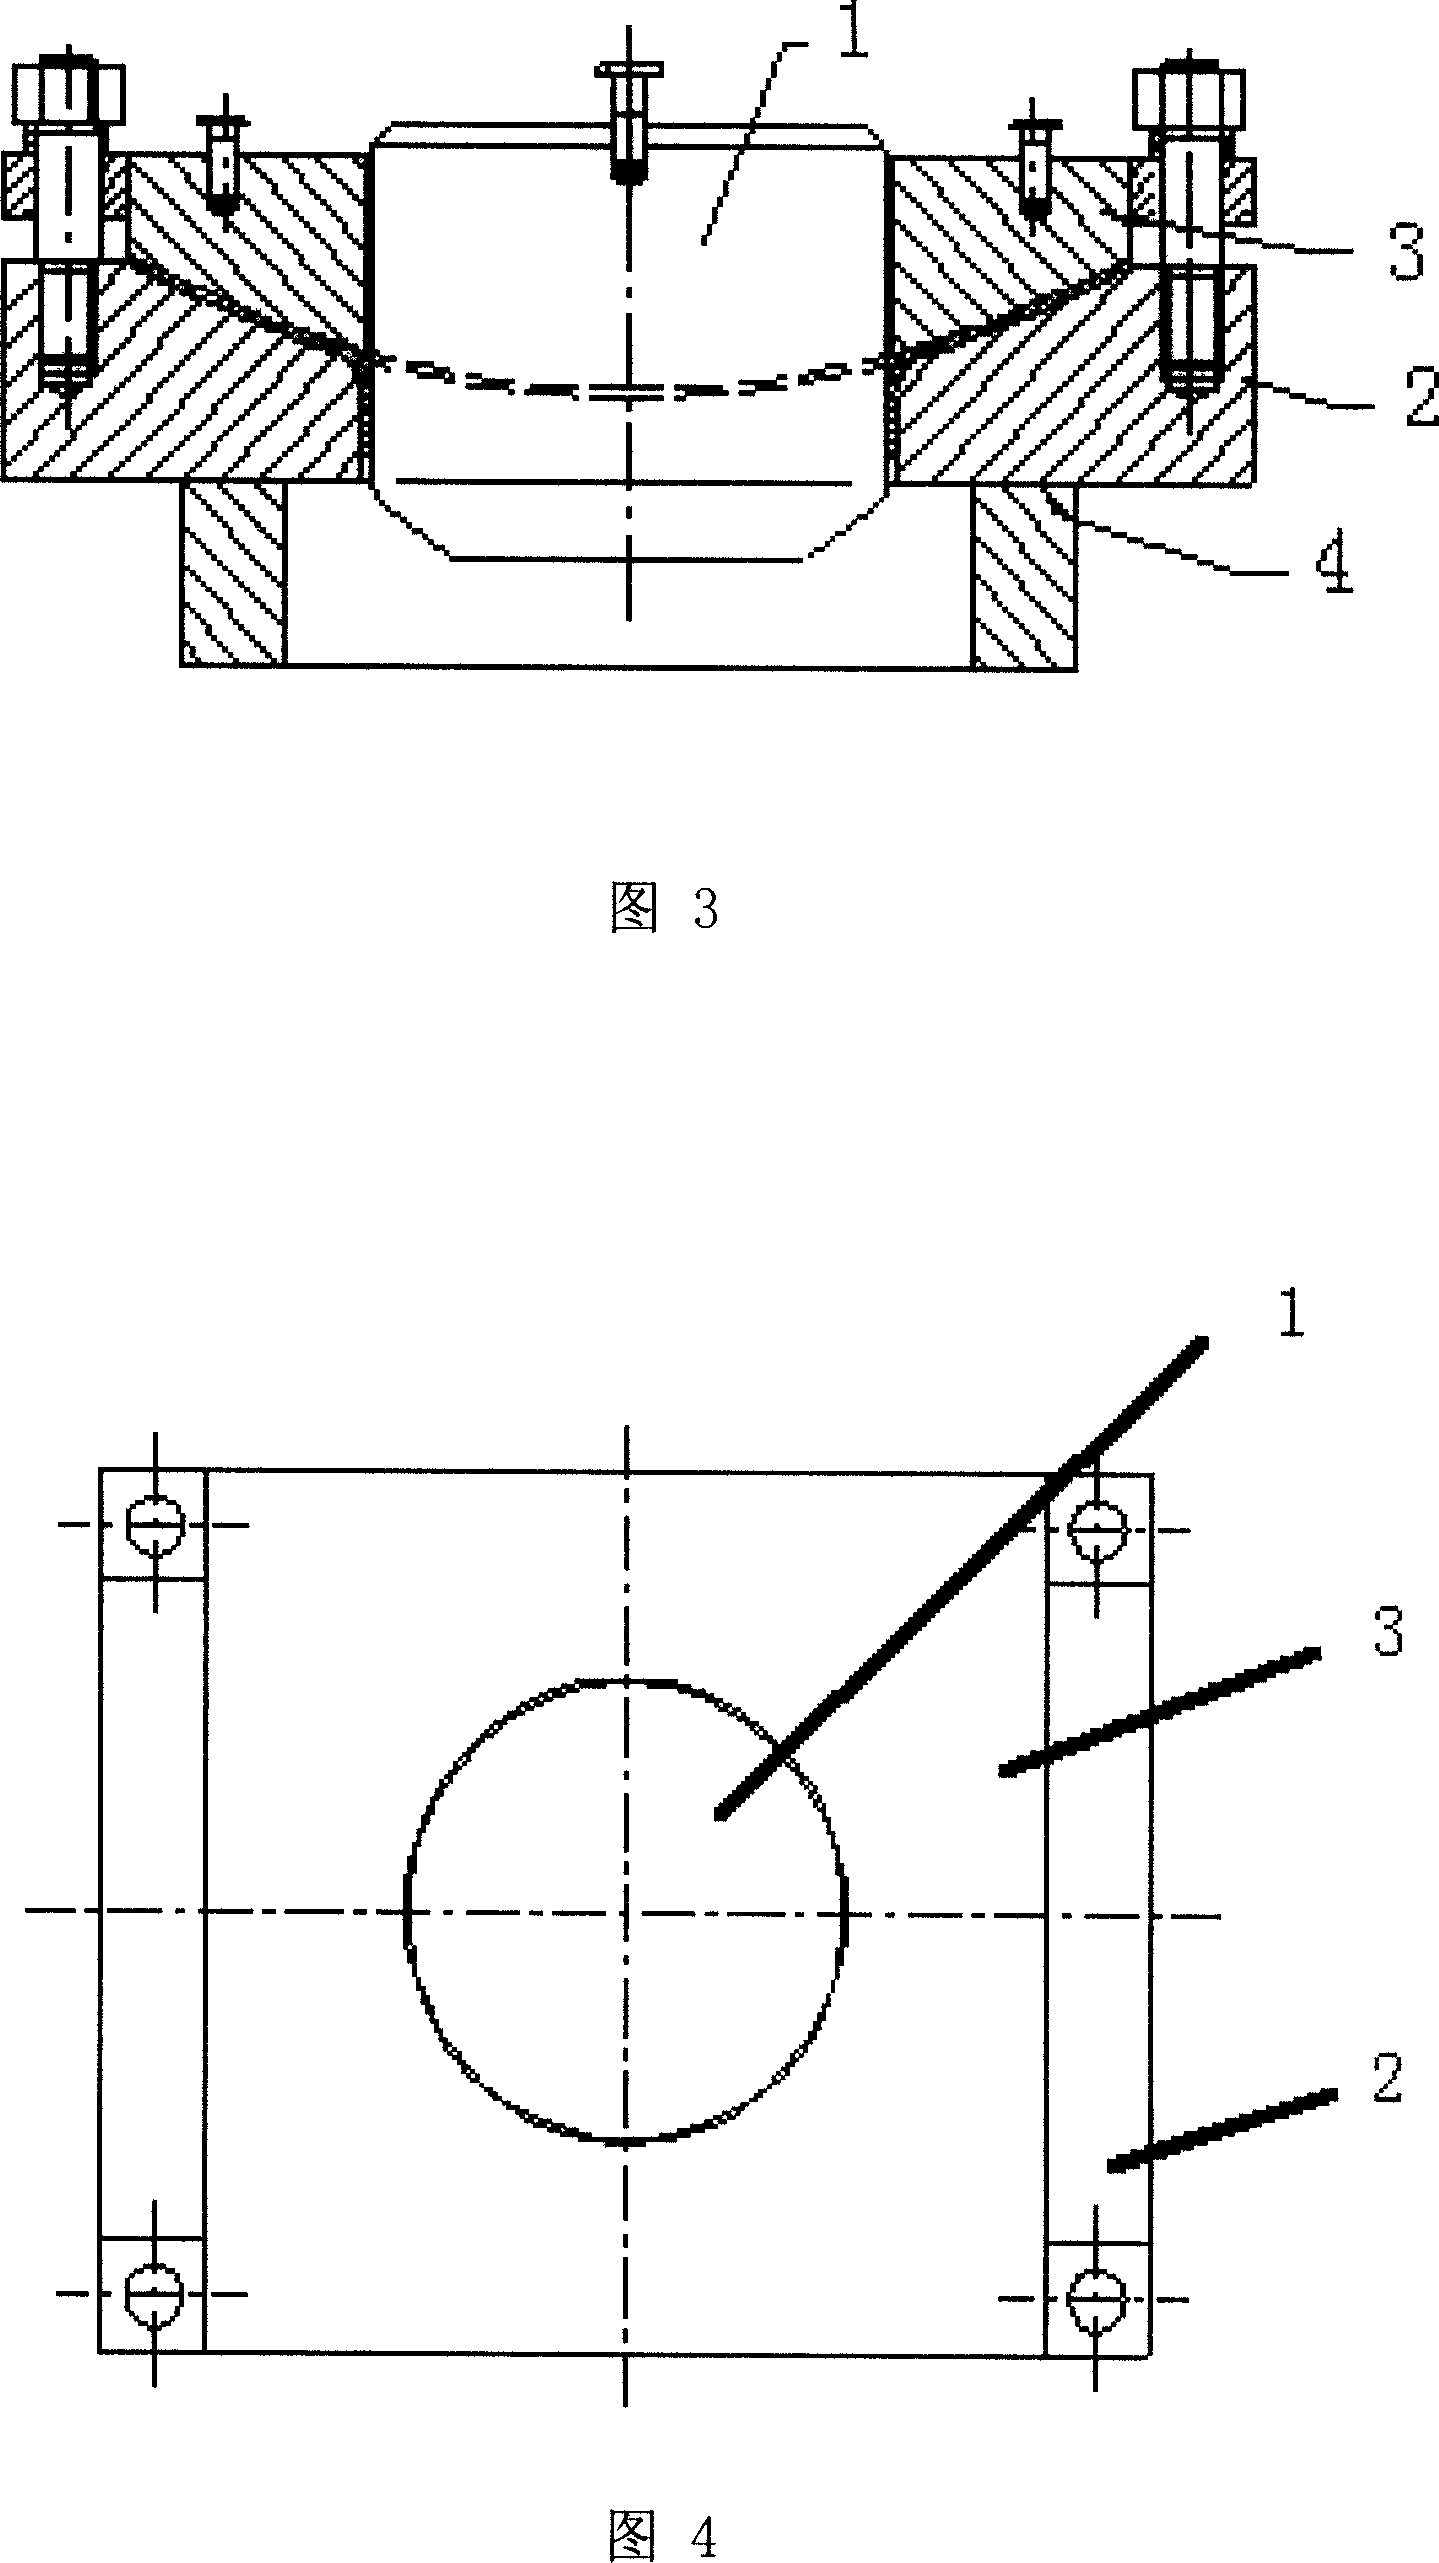 Flanging process of saddle type lining and die